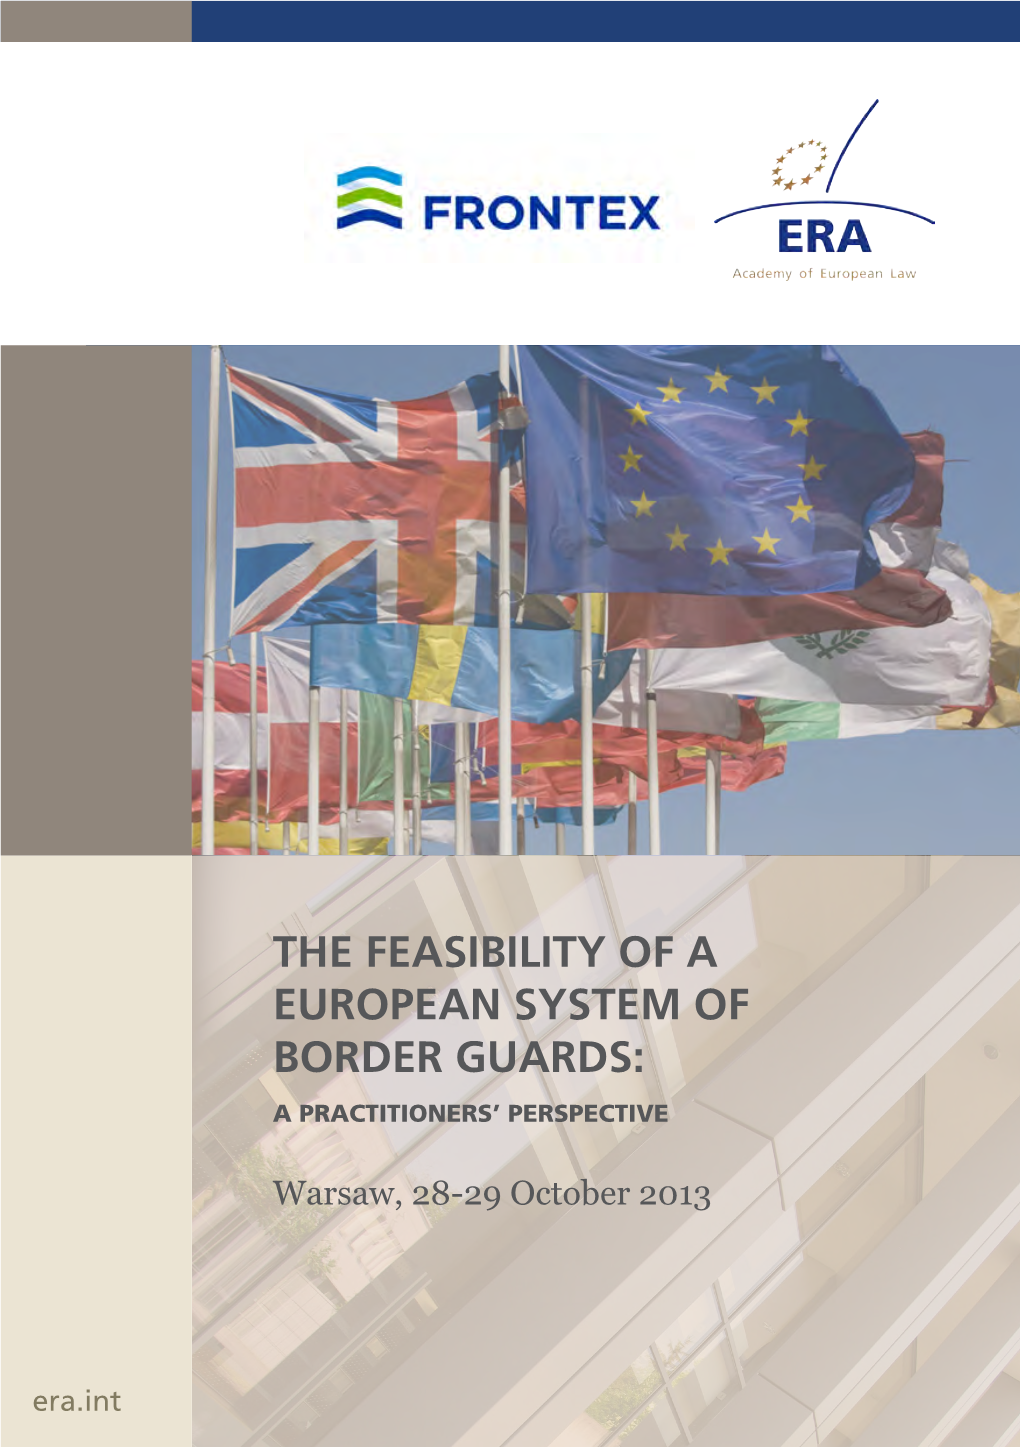 The Feasibility of a European System of Border Guards: a Practitioners’ Perspective